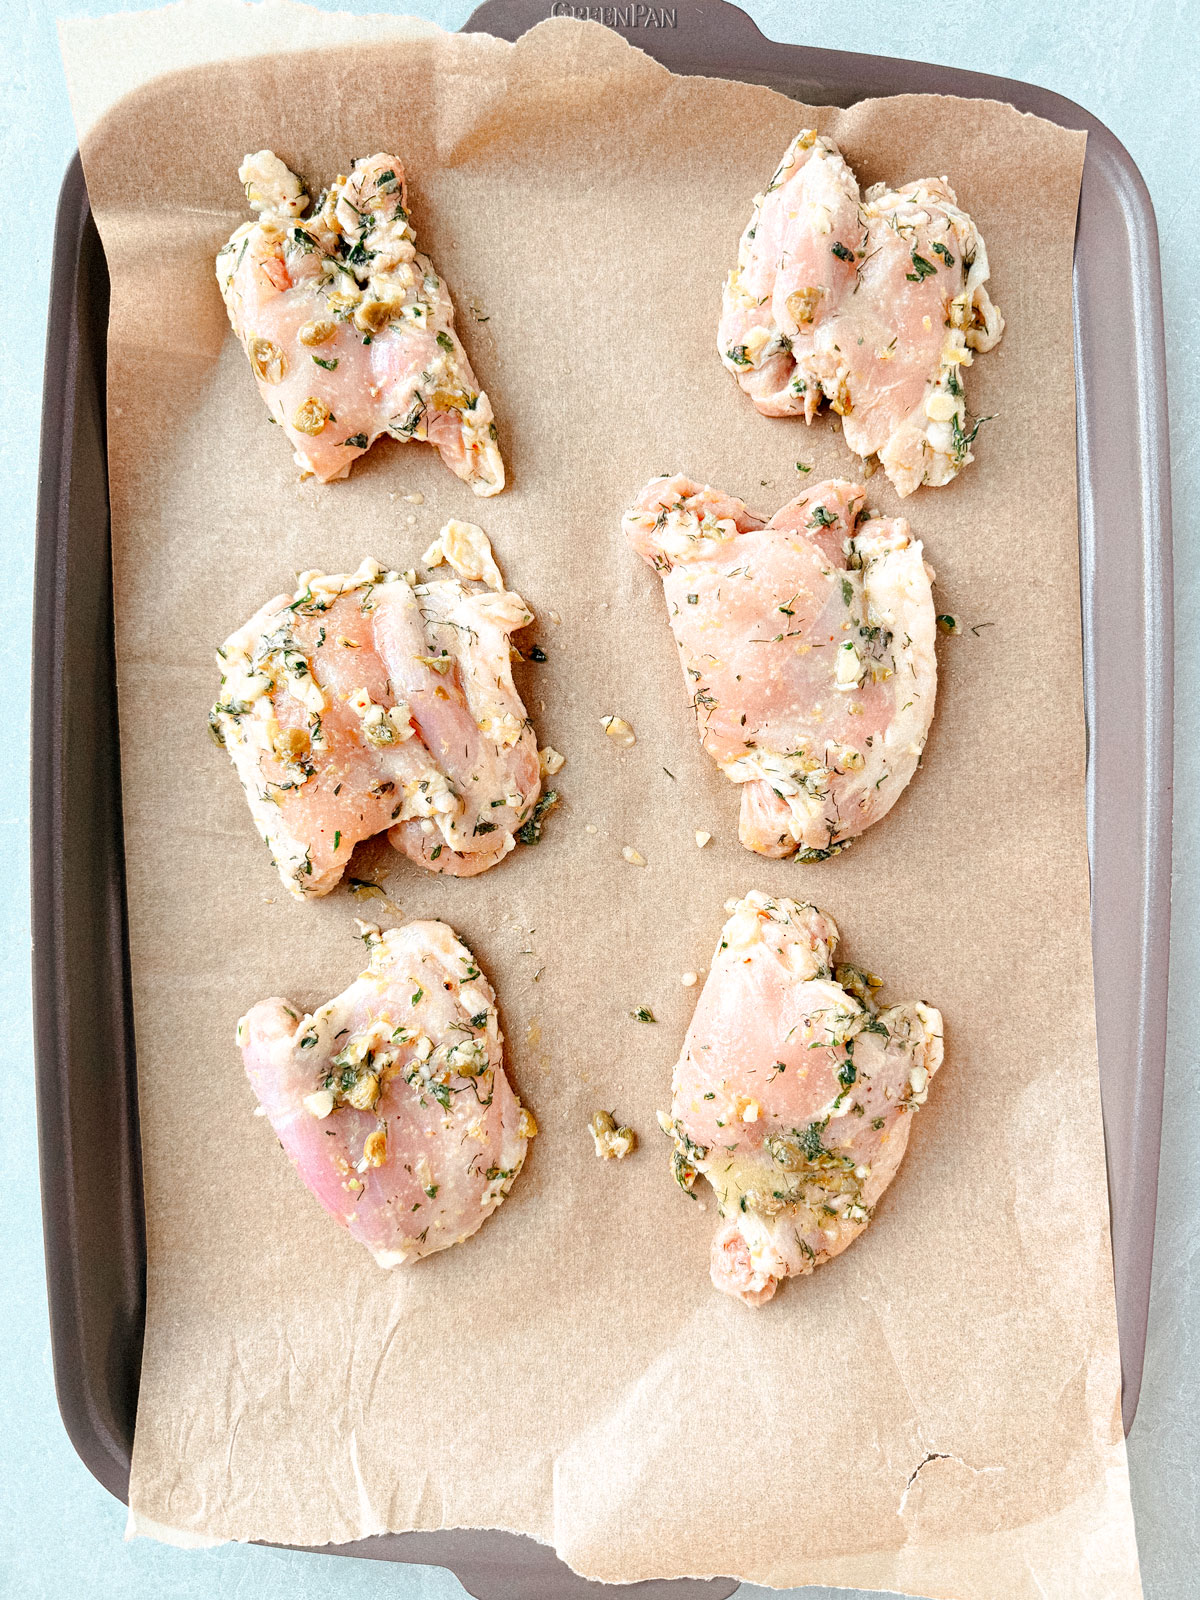 Marinated chicken thighs on a sheet pan.